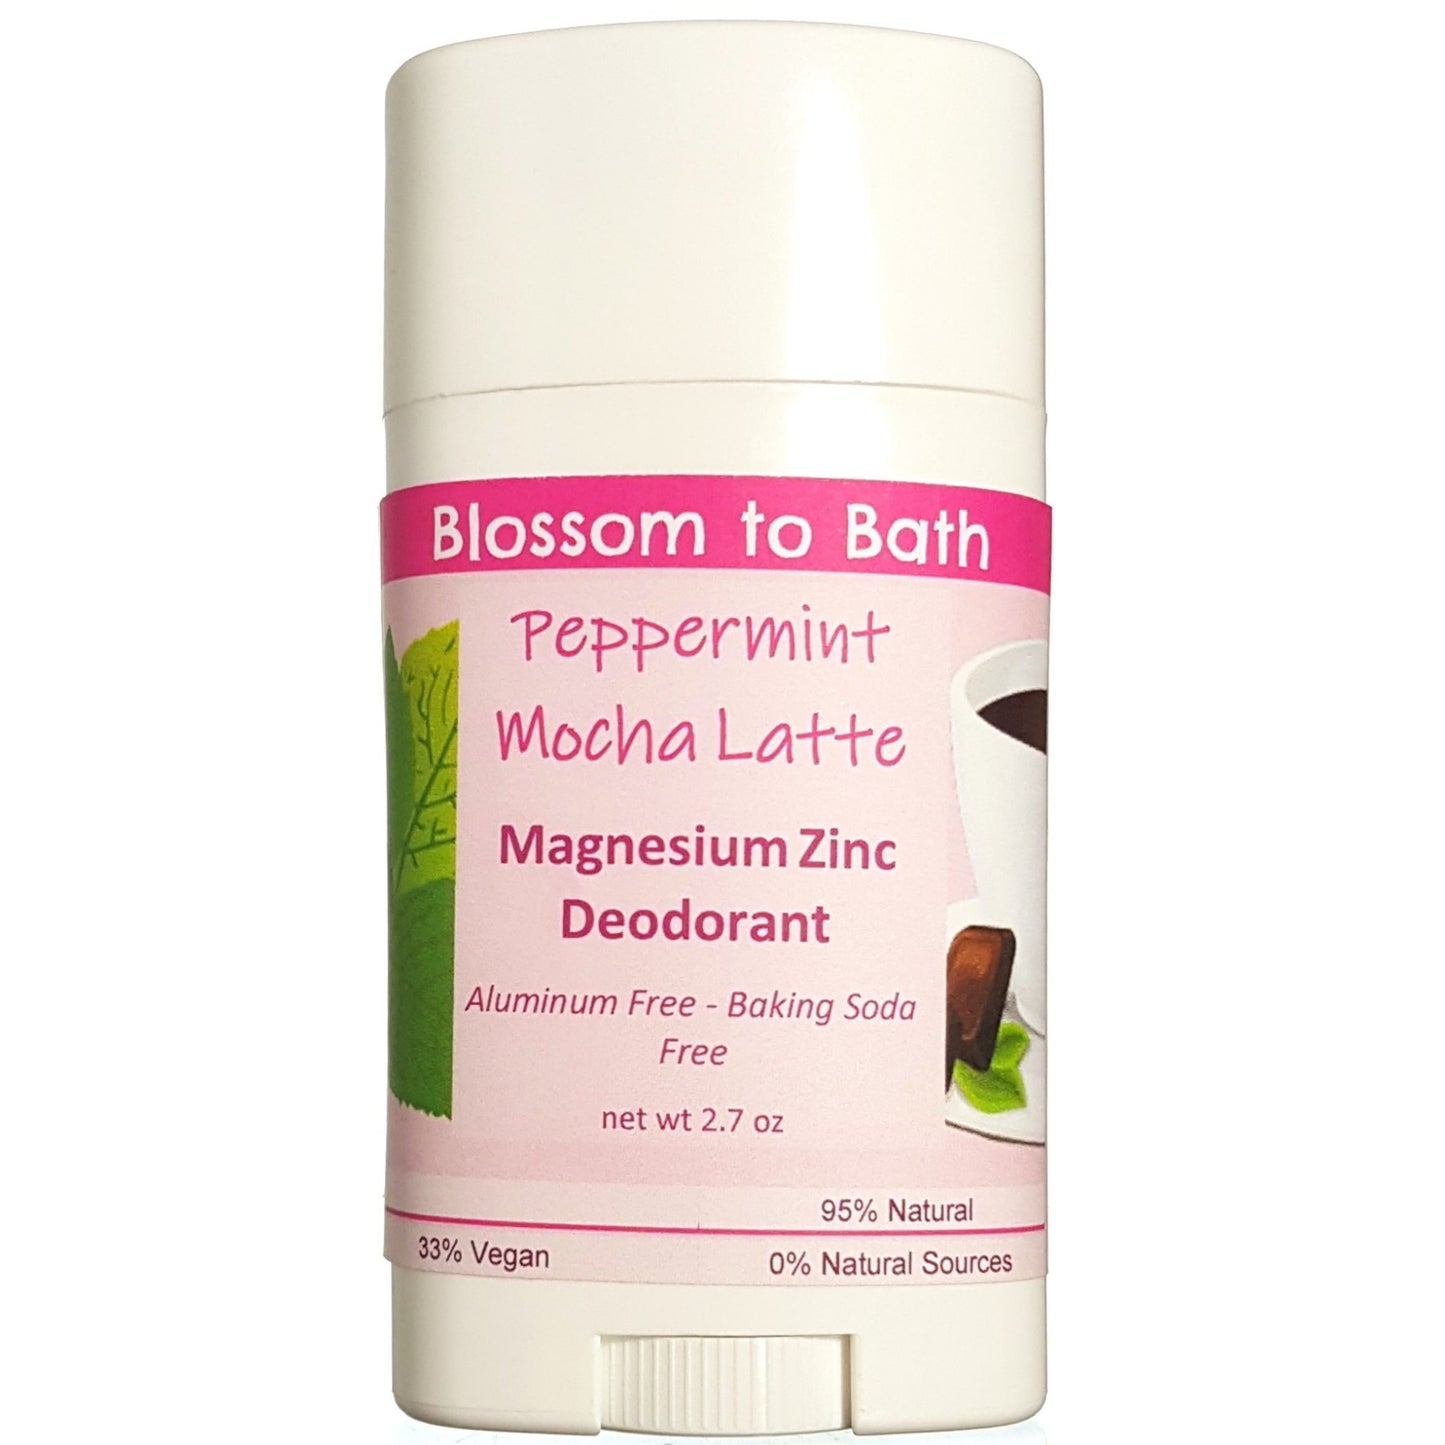 Buy Blossom to Bath Peppermint Mocha Latte Magnesium Zinc Deodorant from Flowersong Soap Studio.  Long lasting protection made from organic botanicals and butters, made without baking soda, tested in the Arizona heat  A confectionary blend of fresh mint, rich fudge, and coffee.